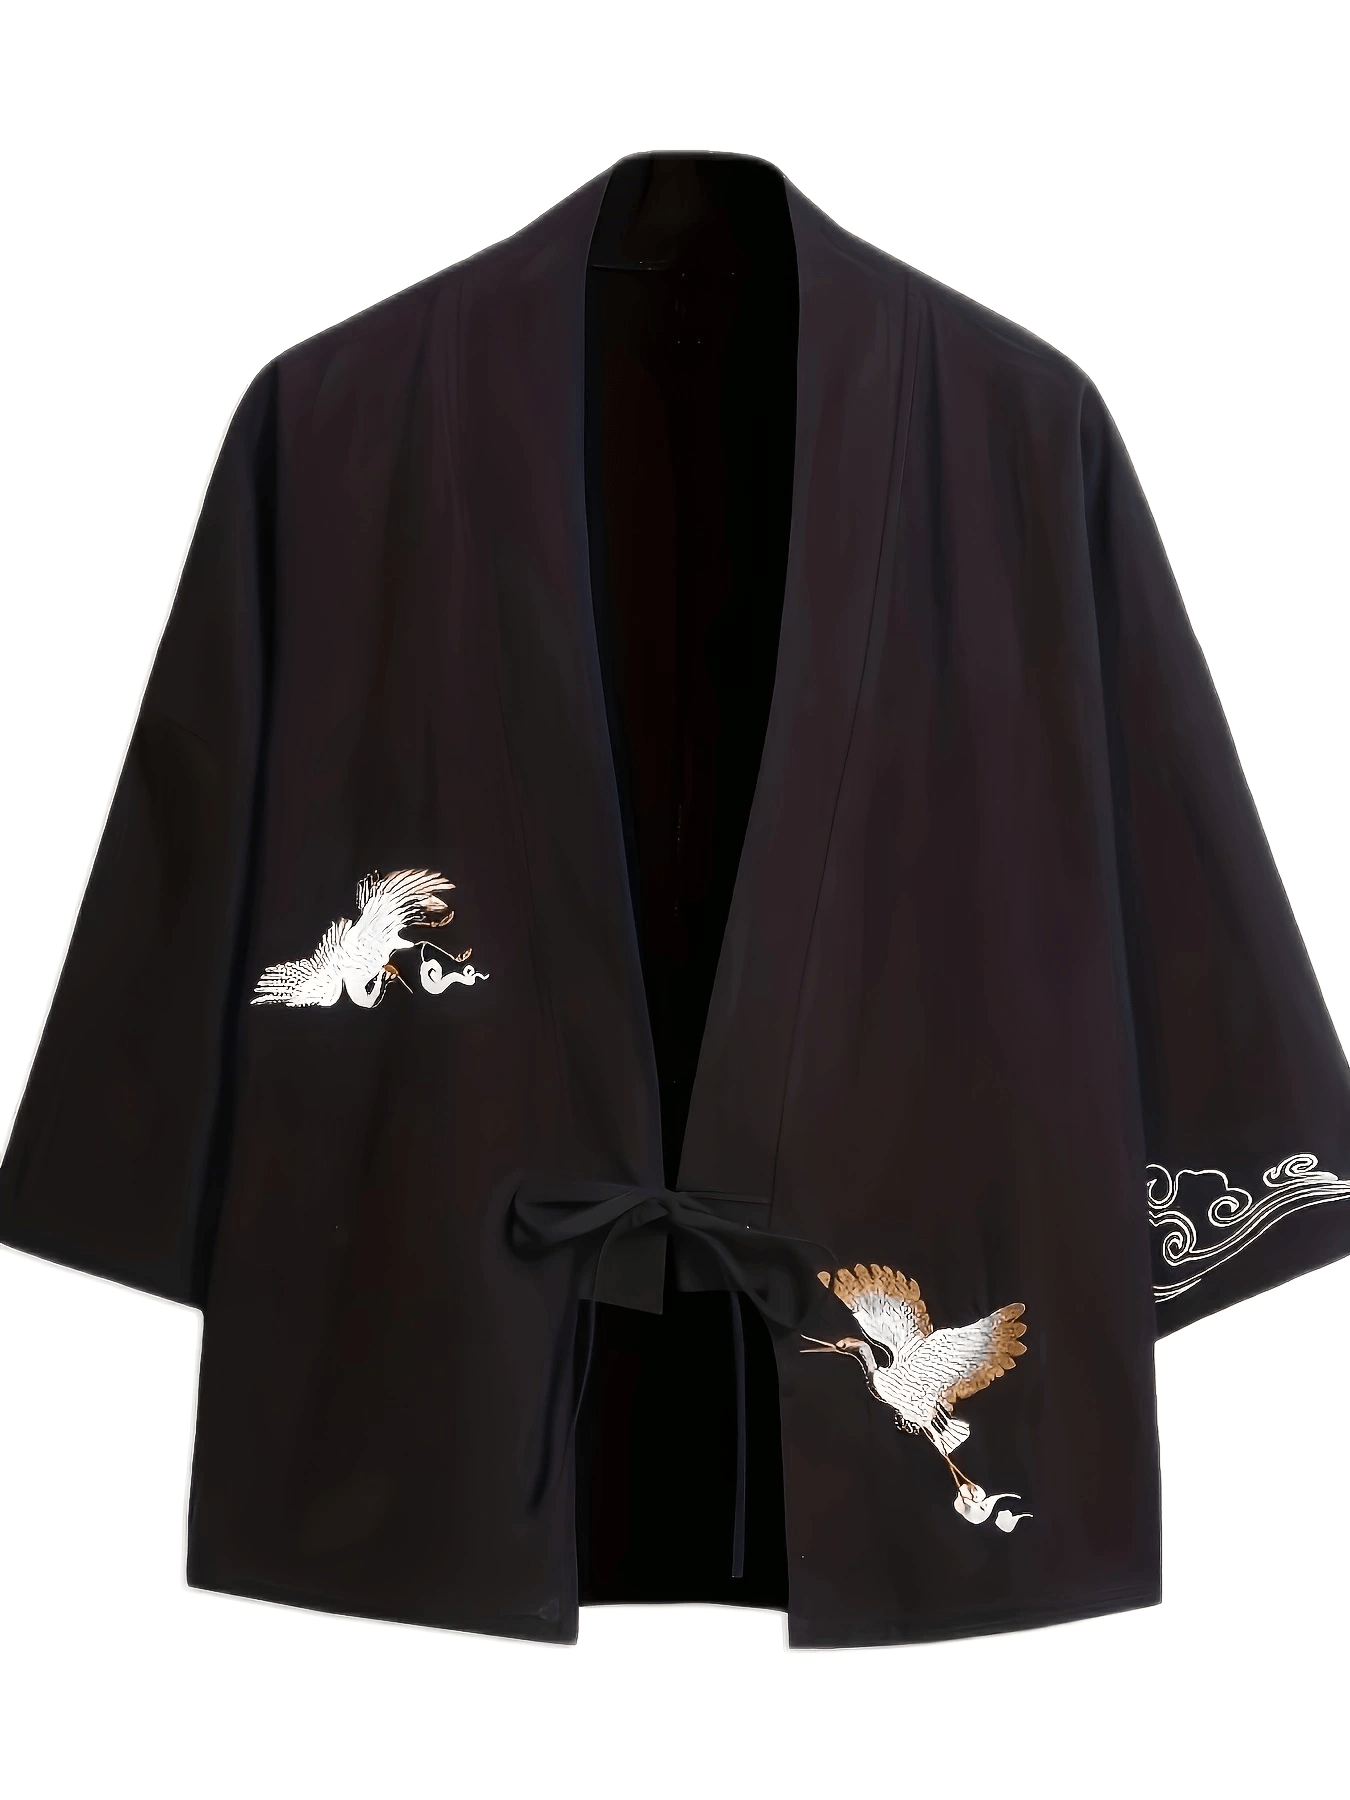 Traditional Vietnamese dress with white cranes pattern